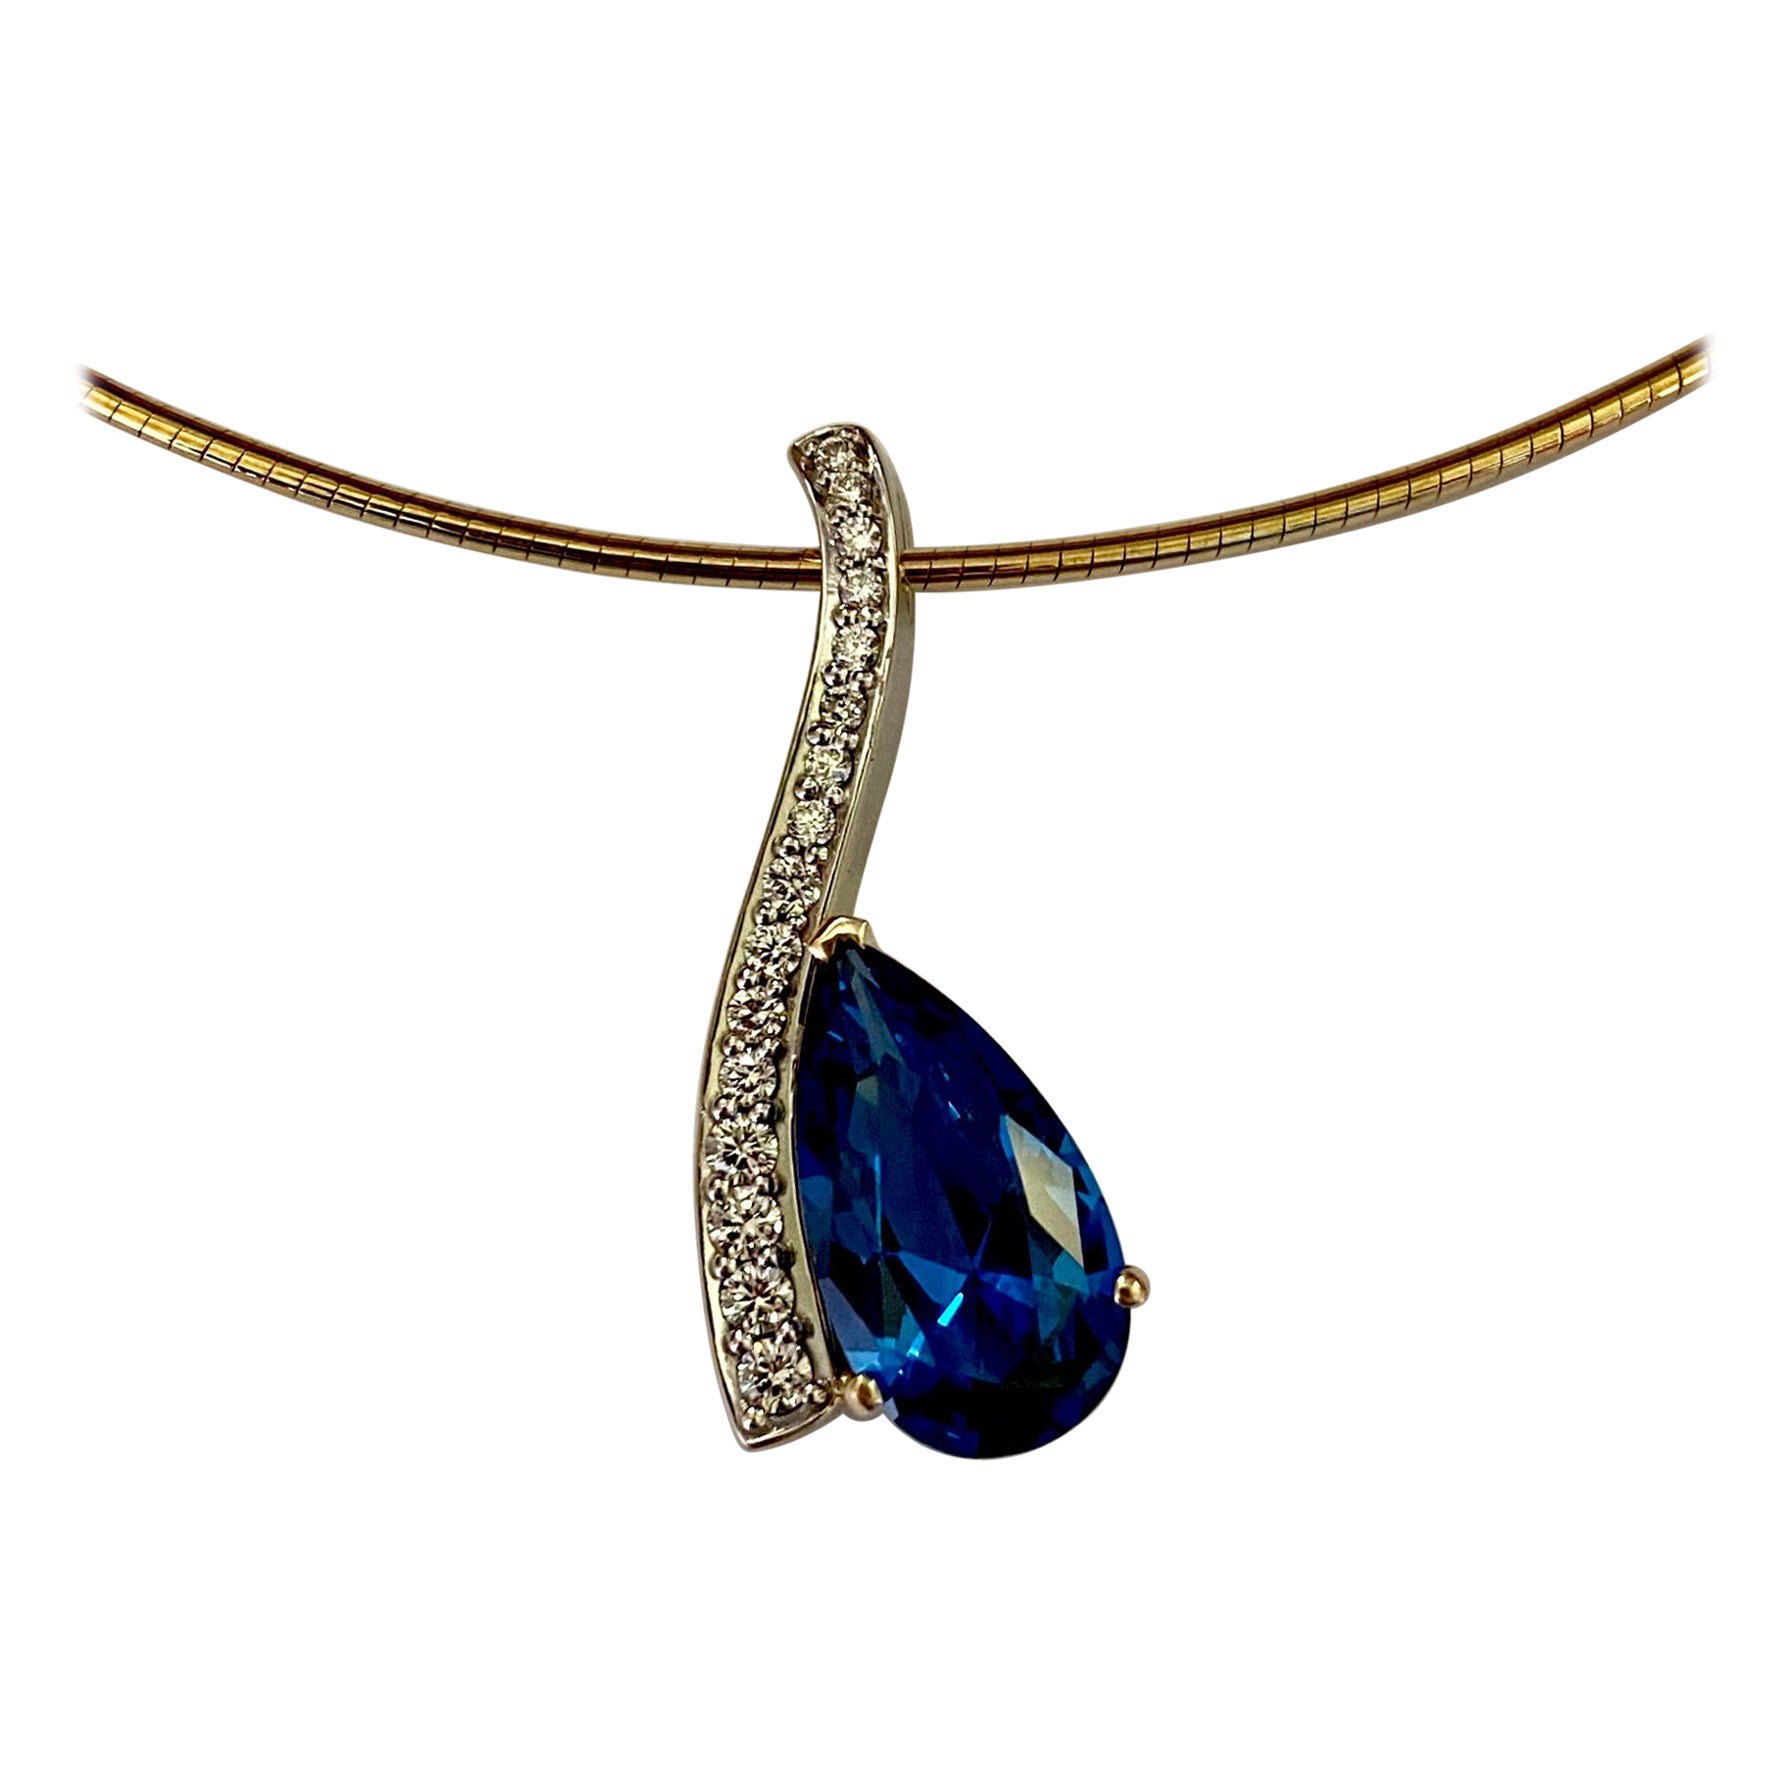 Blue topaz is showcased in this diamond Wavy pendant.  The topaz is an elegant pear shape that perfectly conforms to the curves of the diamond pave setting.  The gem is what might be described as cornflower blue in color and is exceptionally well